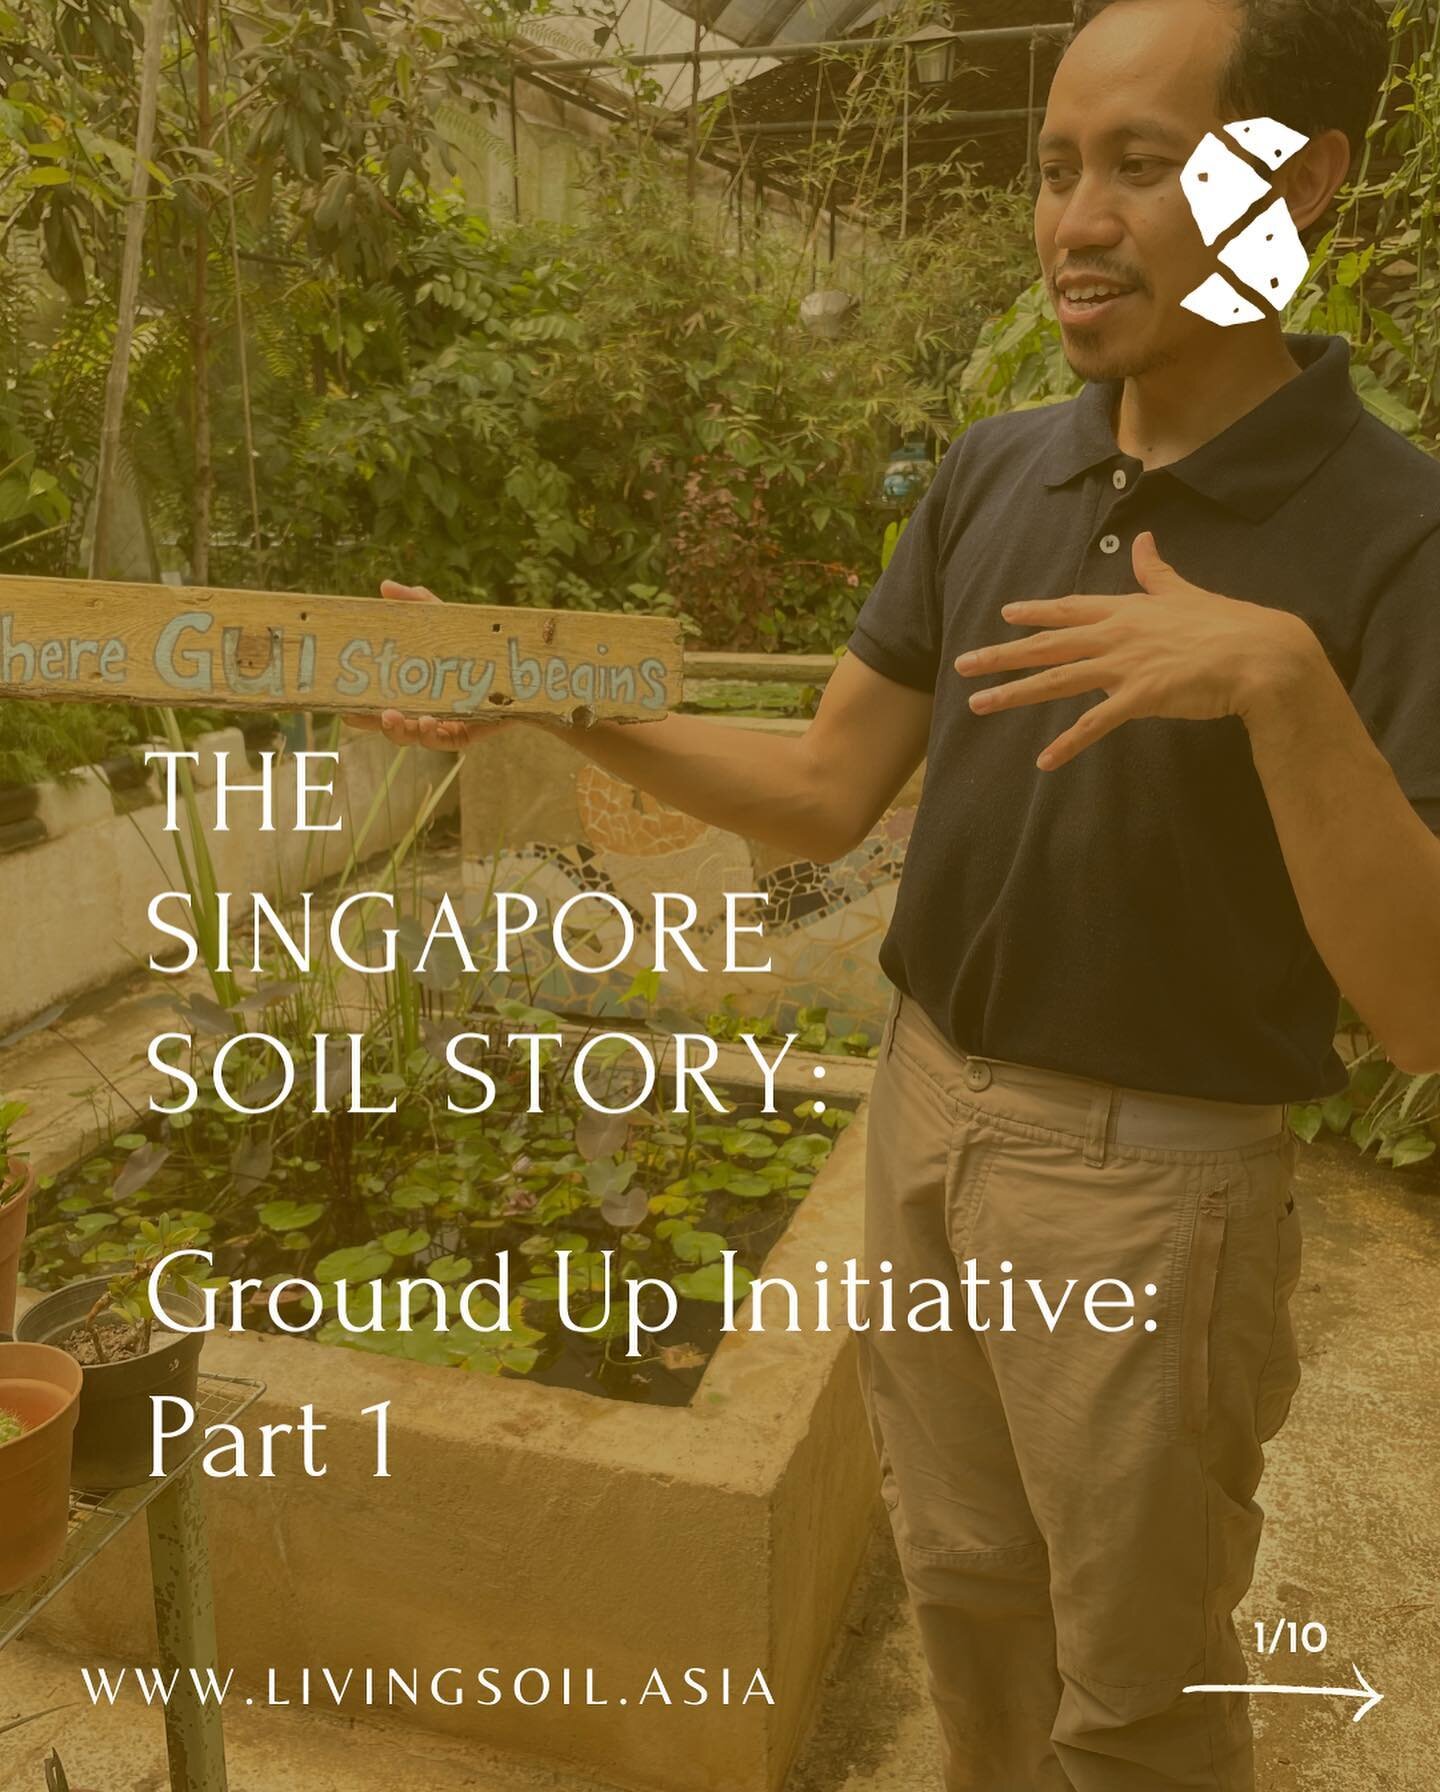 A few weeks ago, the Living Soil team was invited by the lovely folks at @groundupinitiative to learn more about the space they have grown and nurtured since 2009! 

As they make their next big move, here are tidbits of what we have learnt from our j